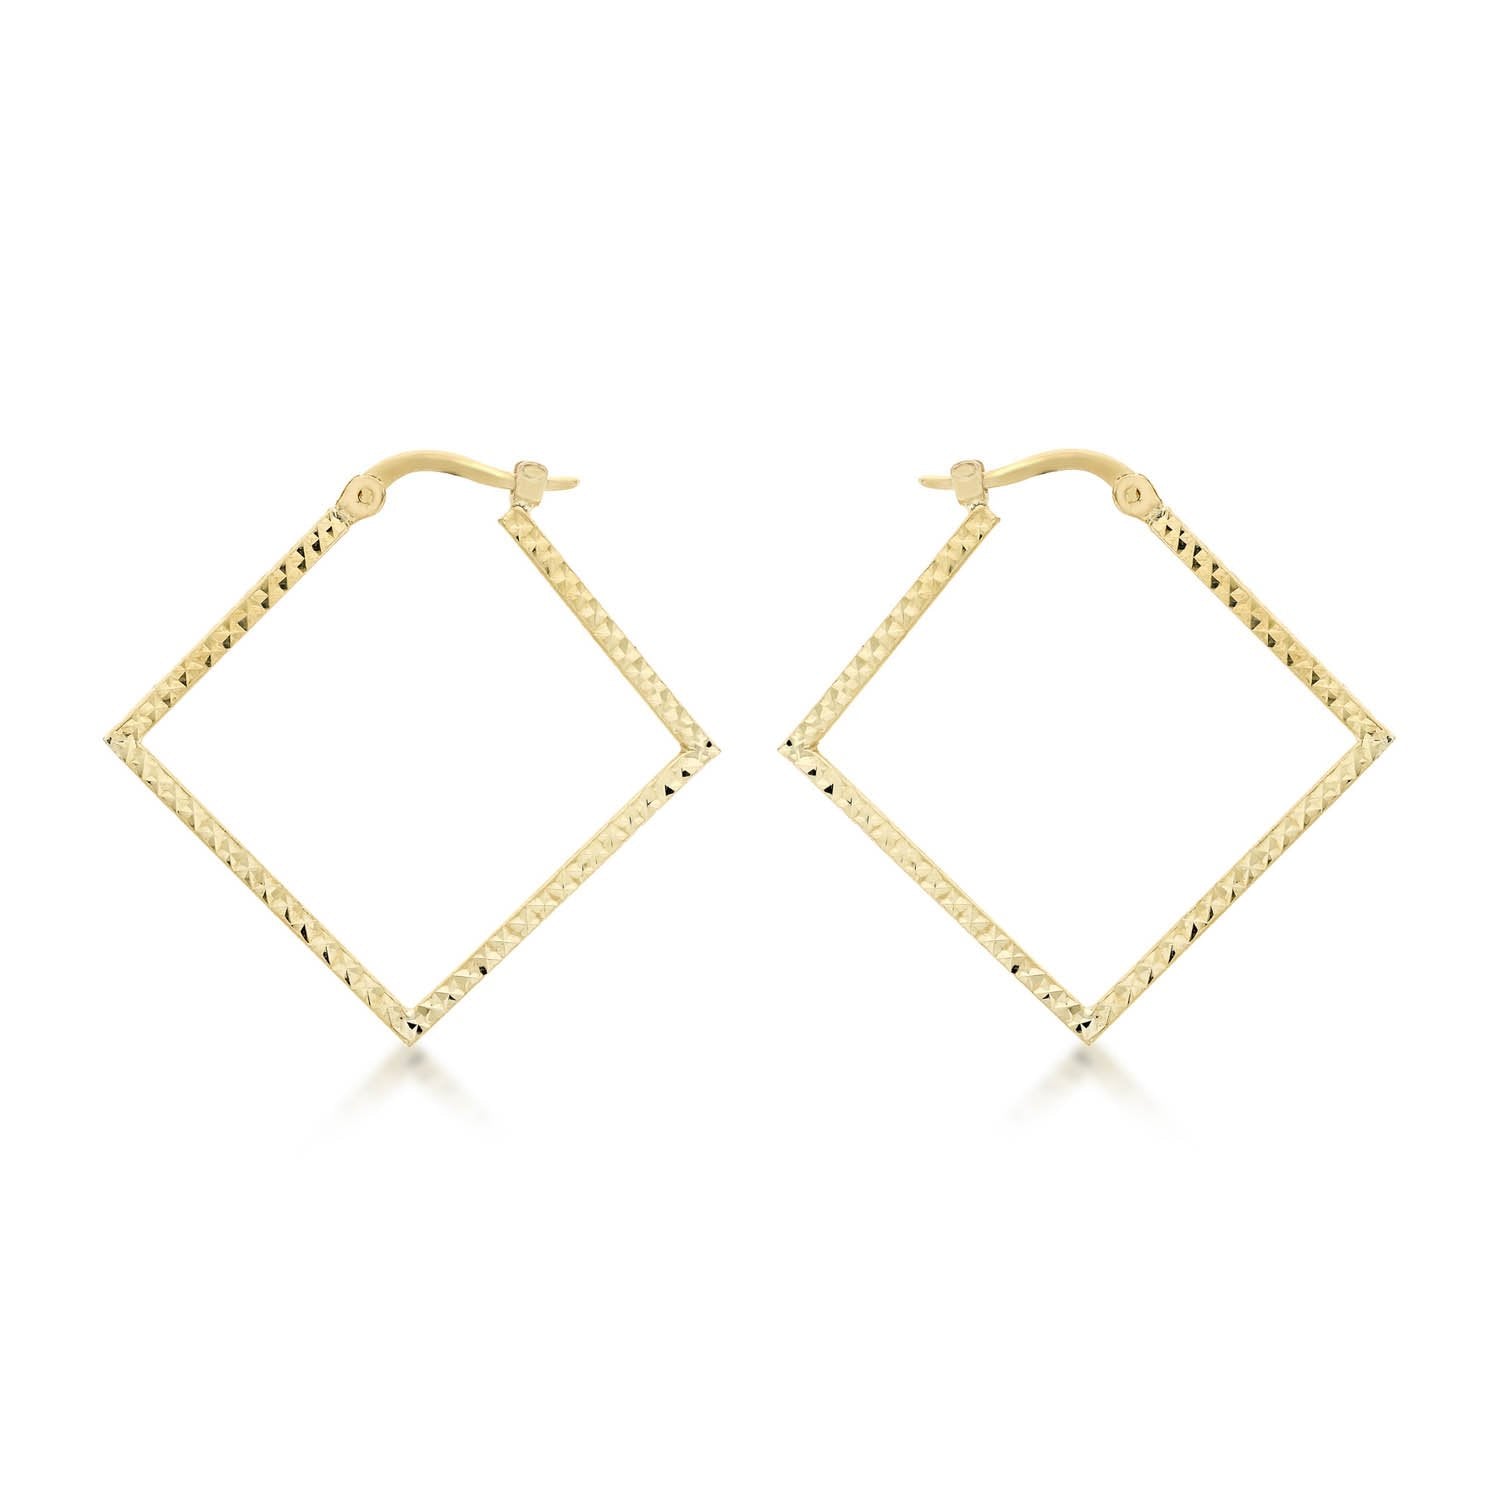 9ct Yellow Gold 23mm x 23mm Diamond Cut Square Creole Earrings